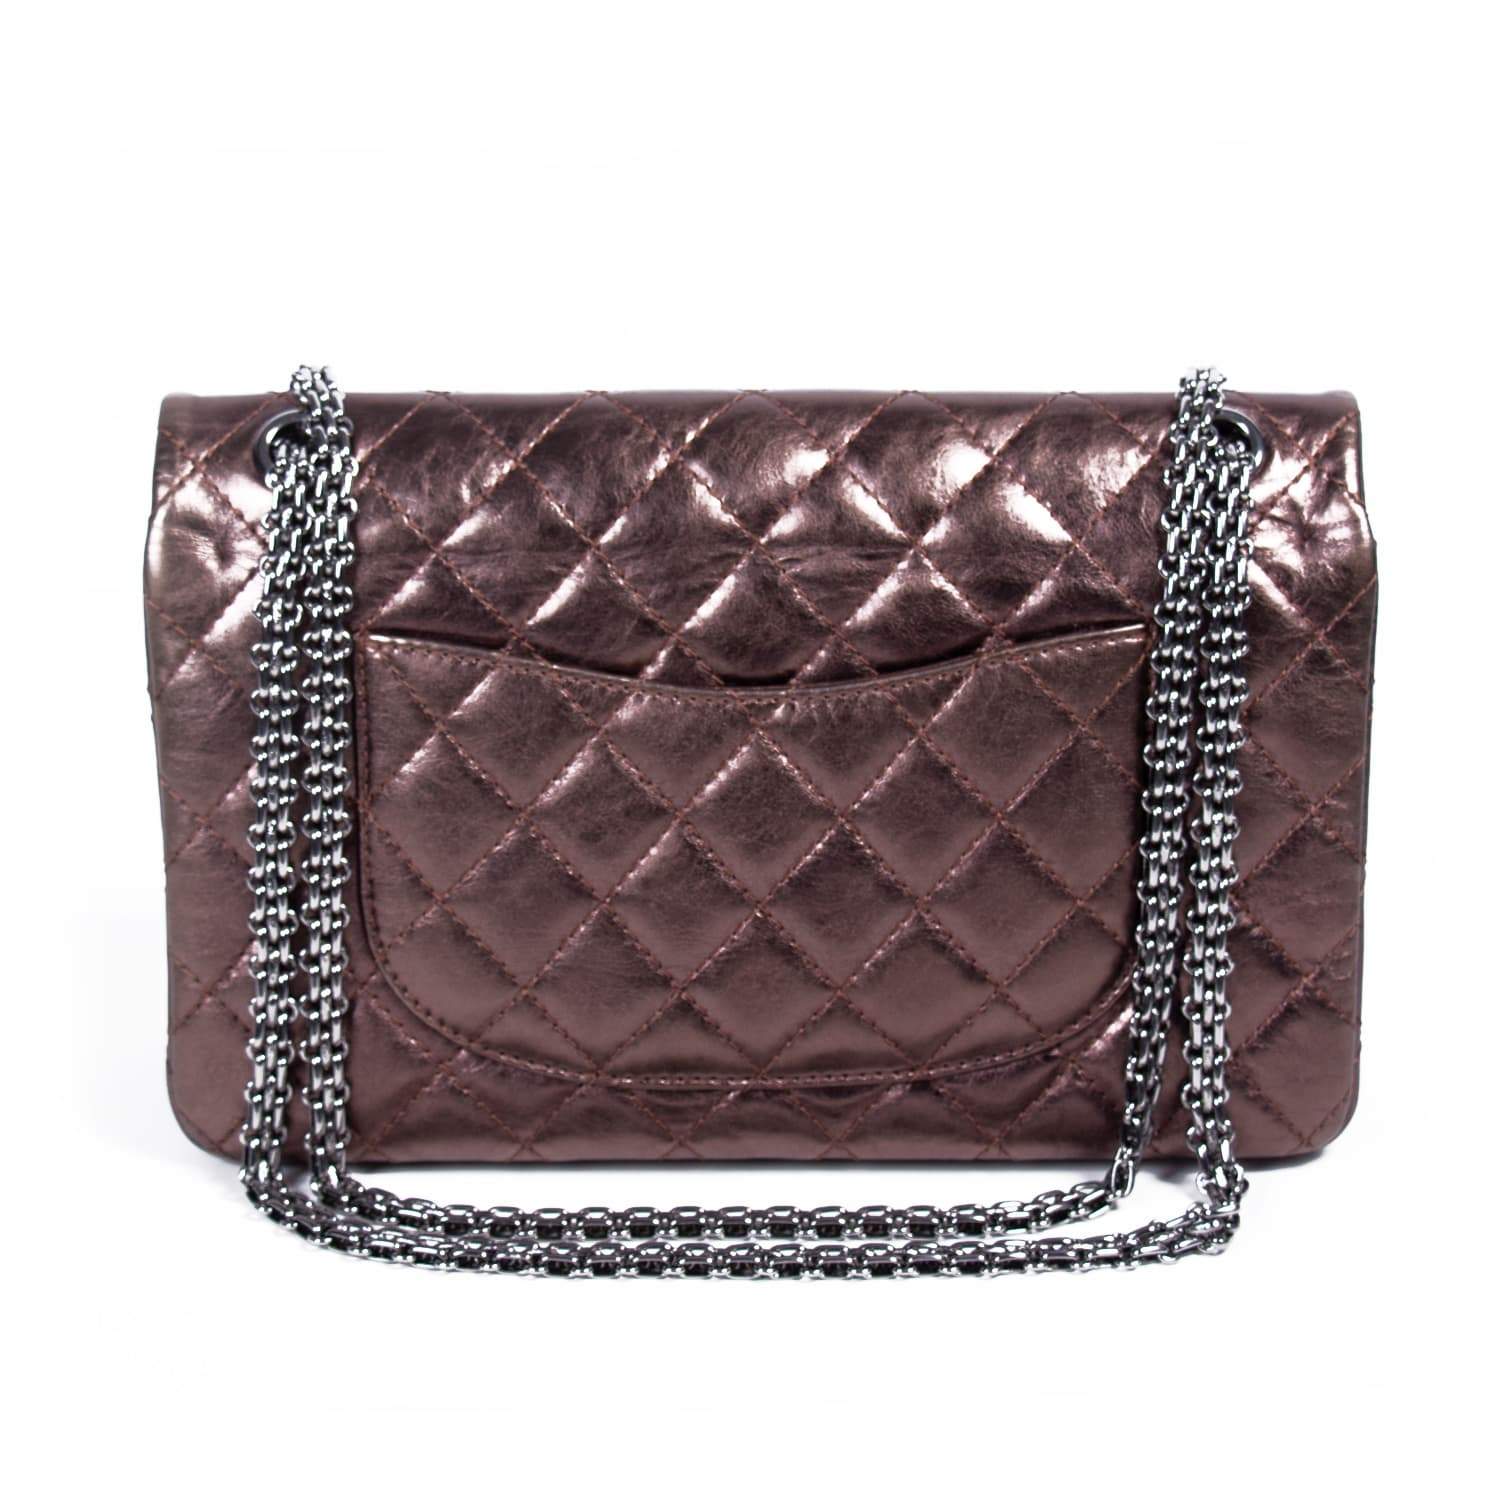 Chanel Bronze Quilted Leather Reissue 2.55 Classic 226 Flap Bag